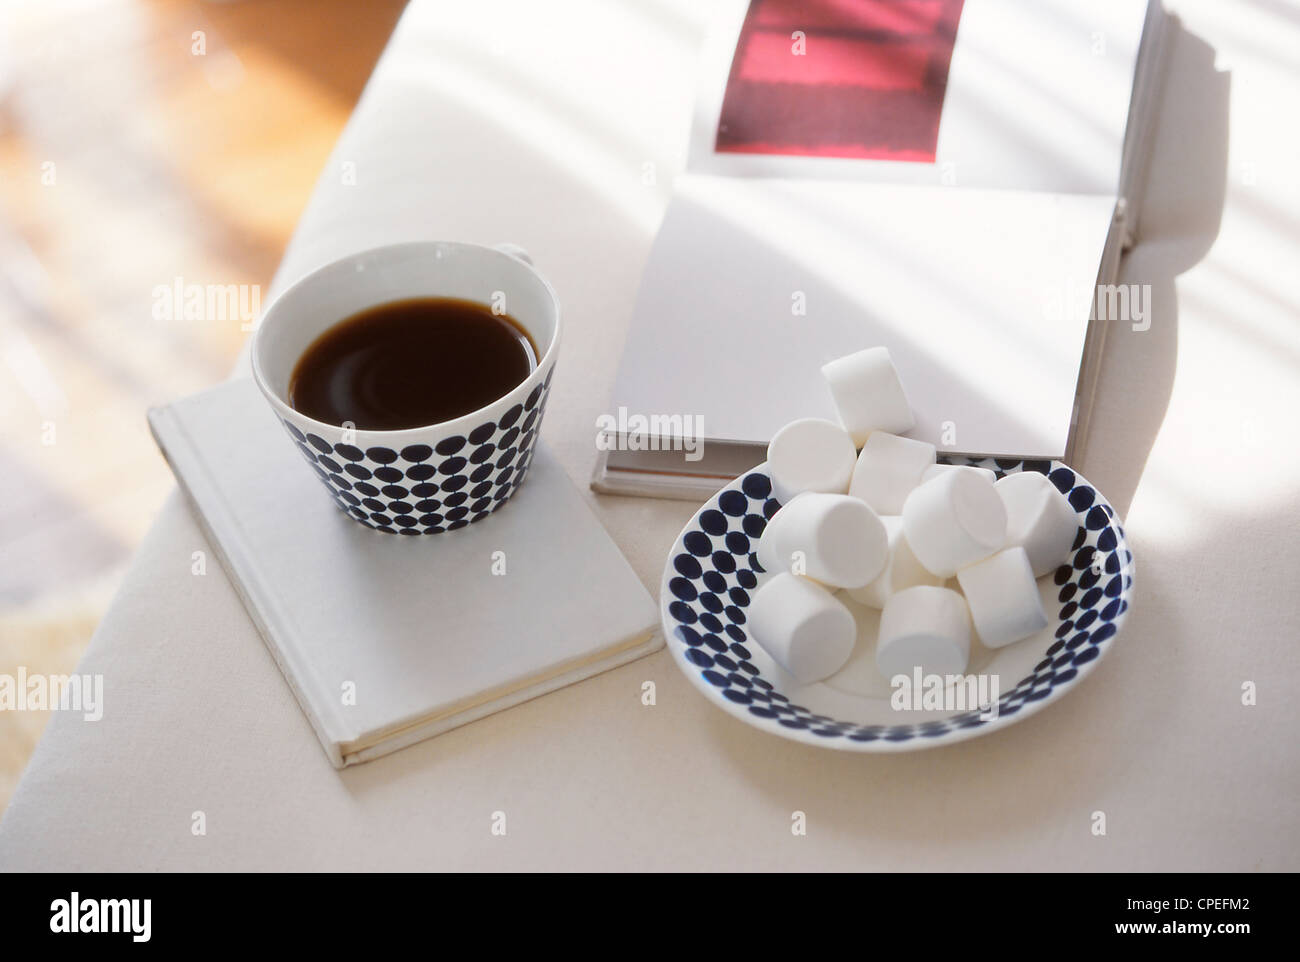 Tea And Cylindrical Sugar Cubes On Table Stock Photo